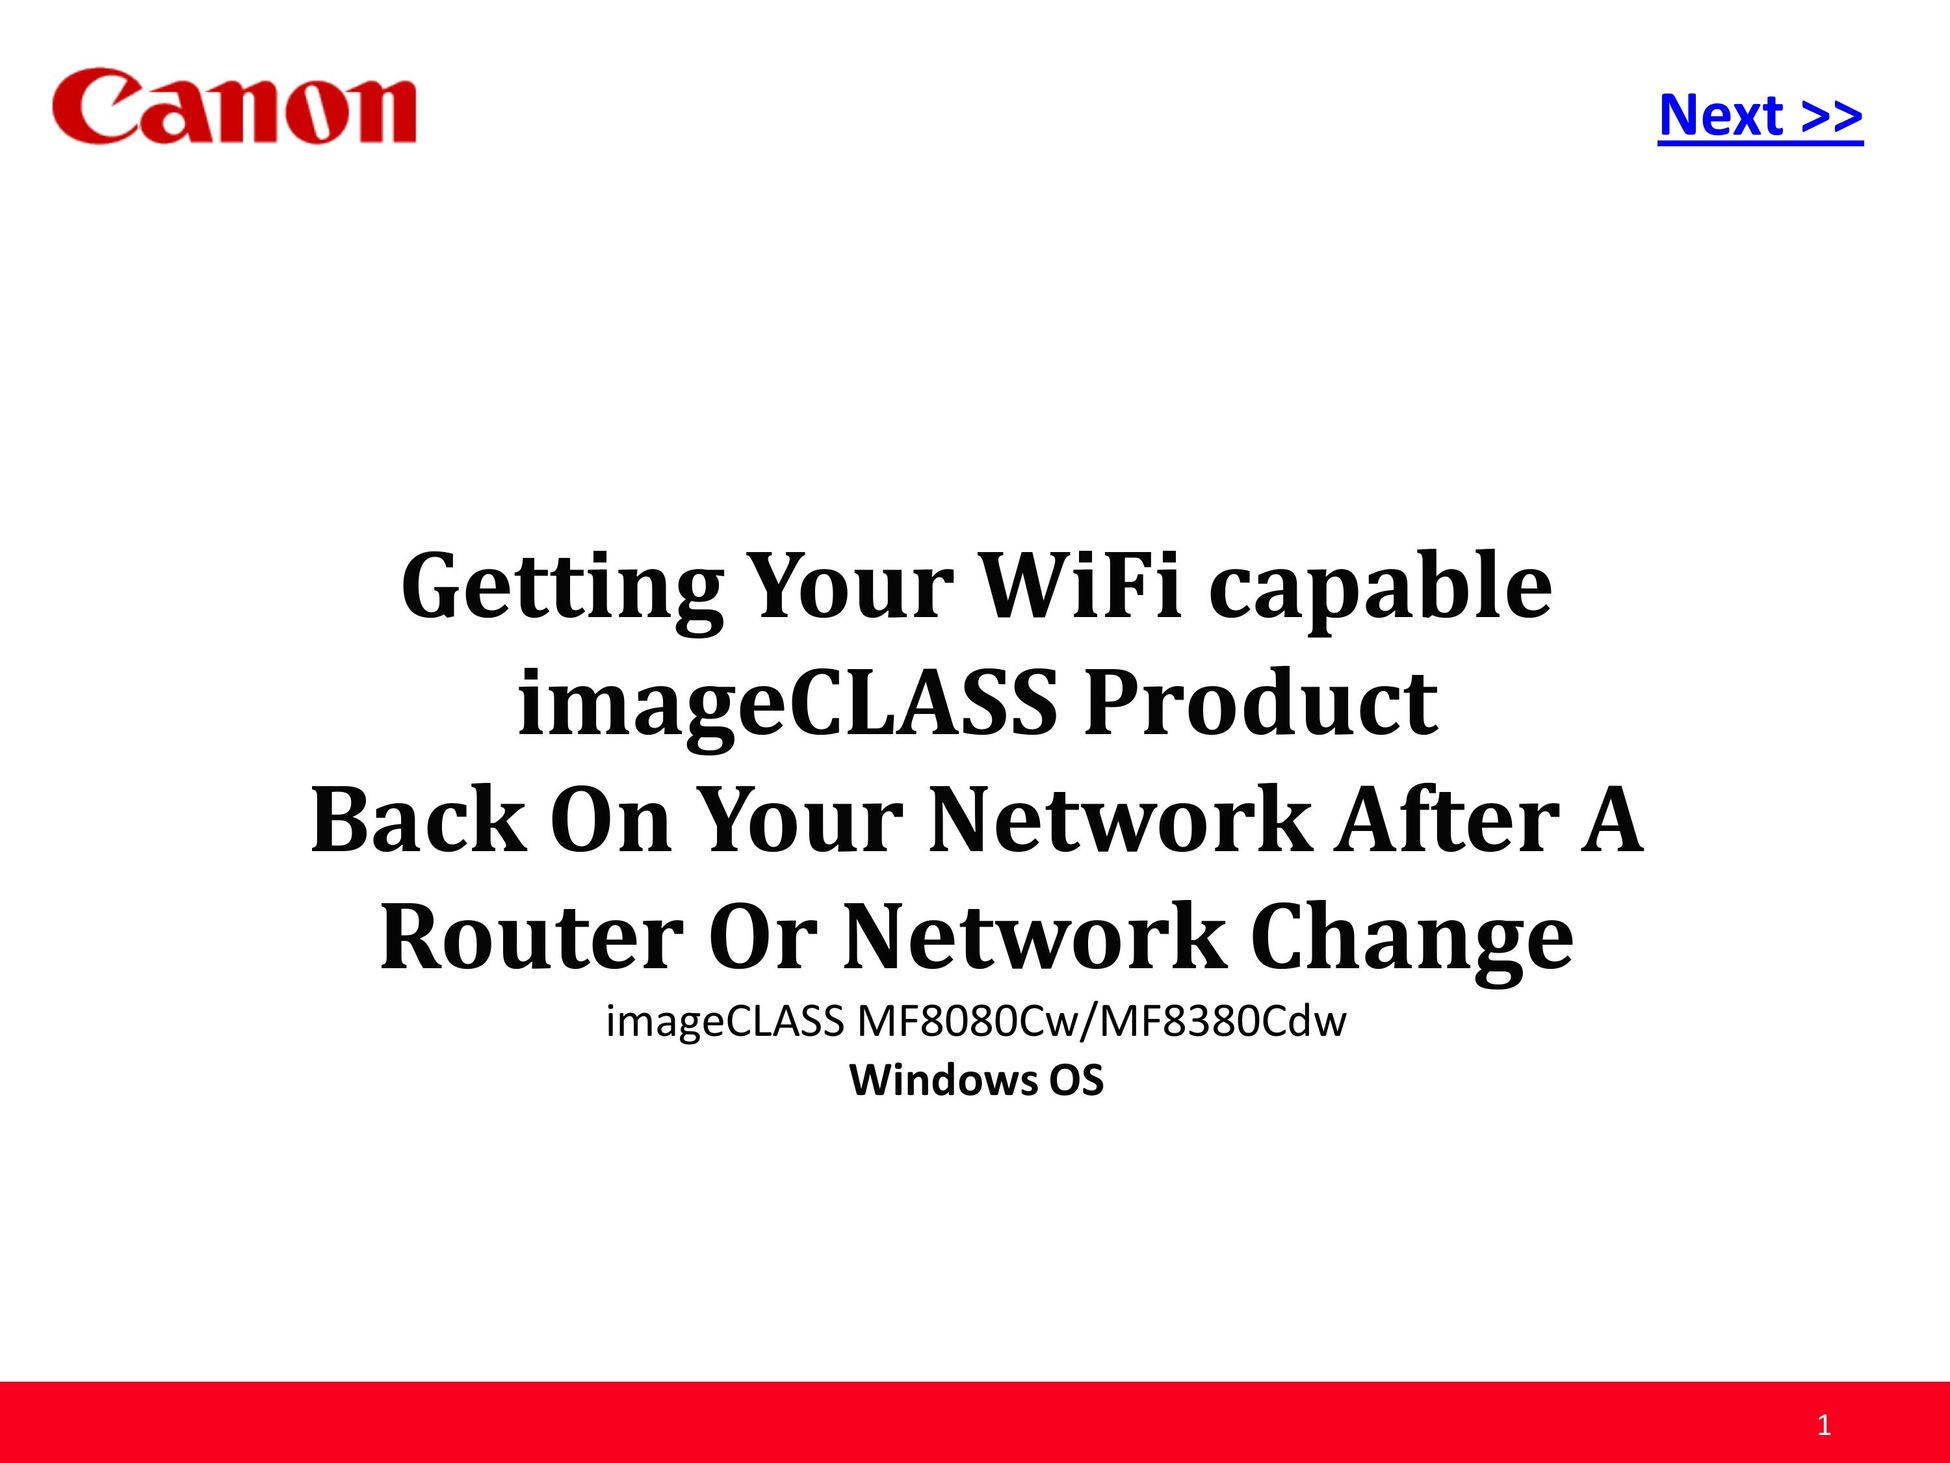 Canon MF8380CDW Network Router User Manual